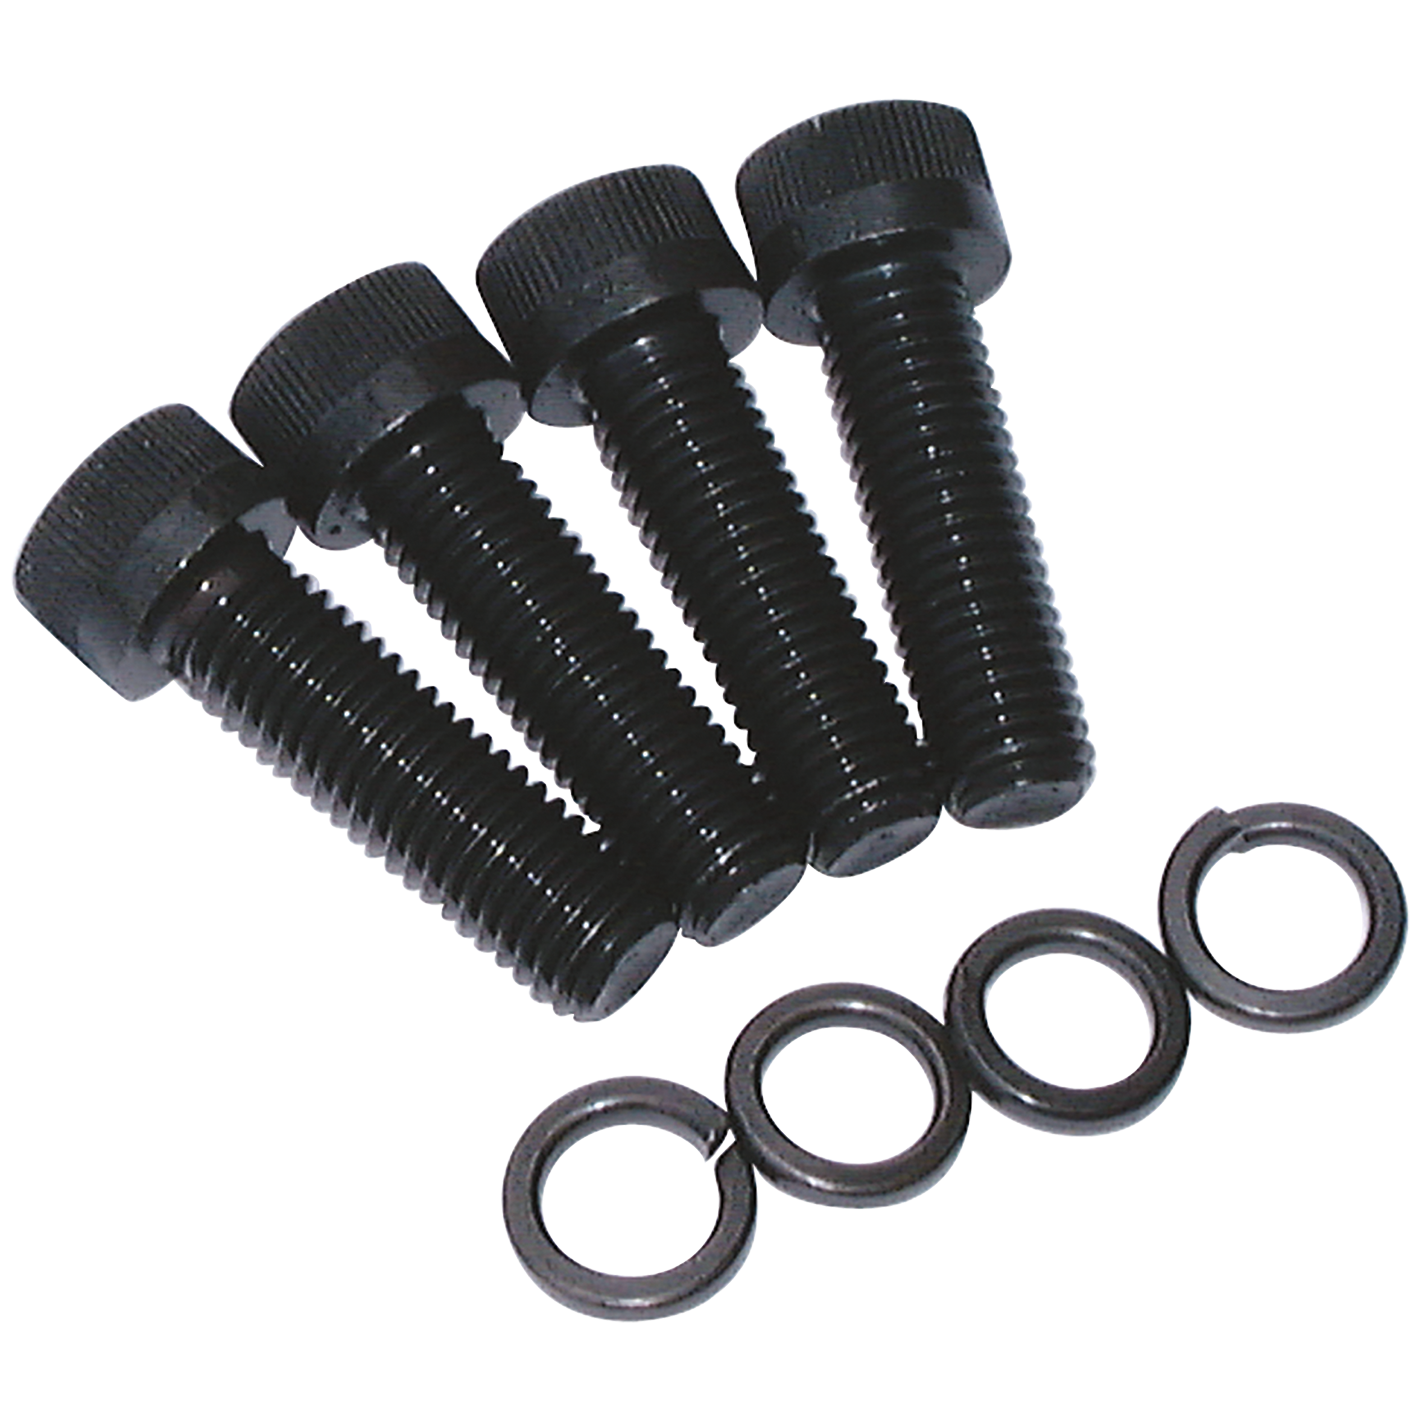 M10X35 BOLTS AND SPRING WASHERS X 4